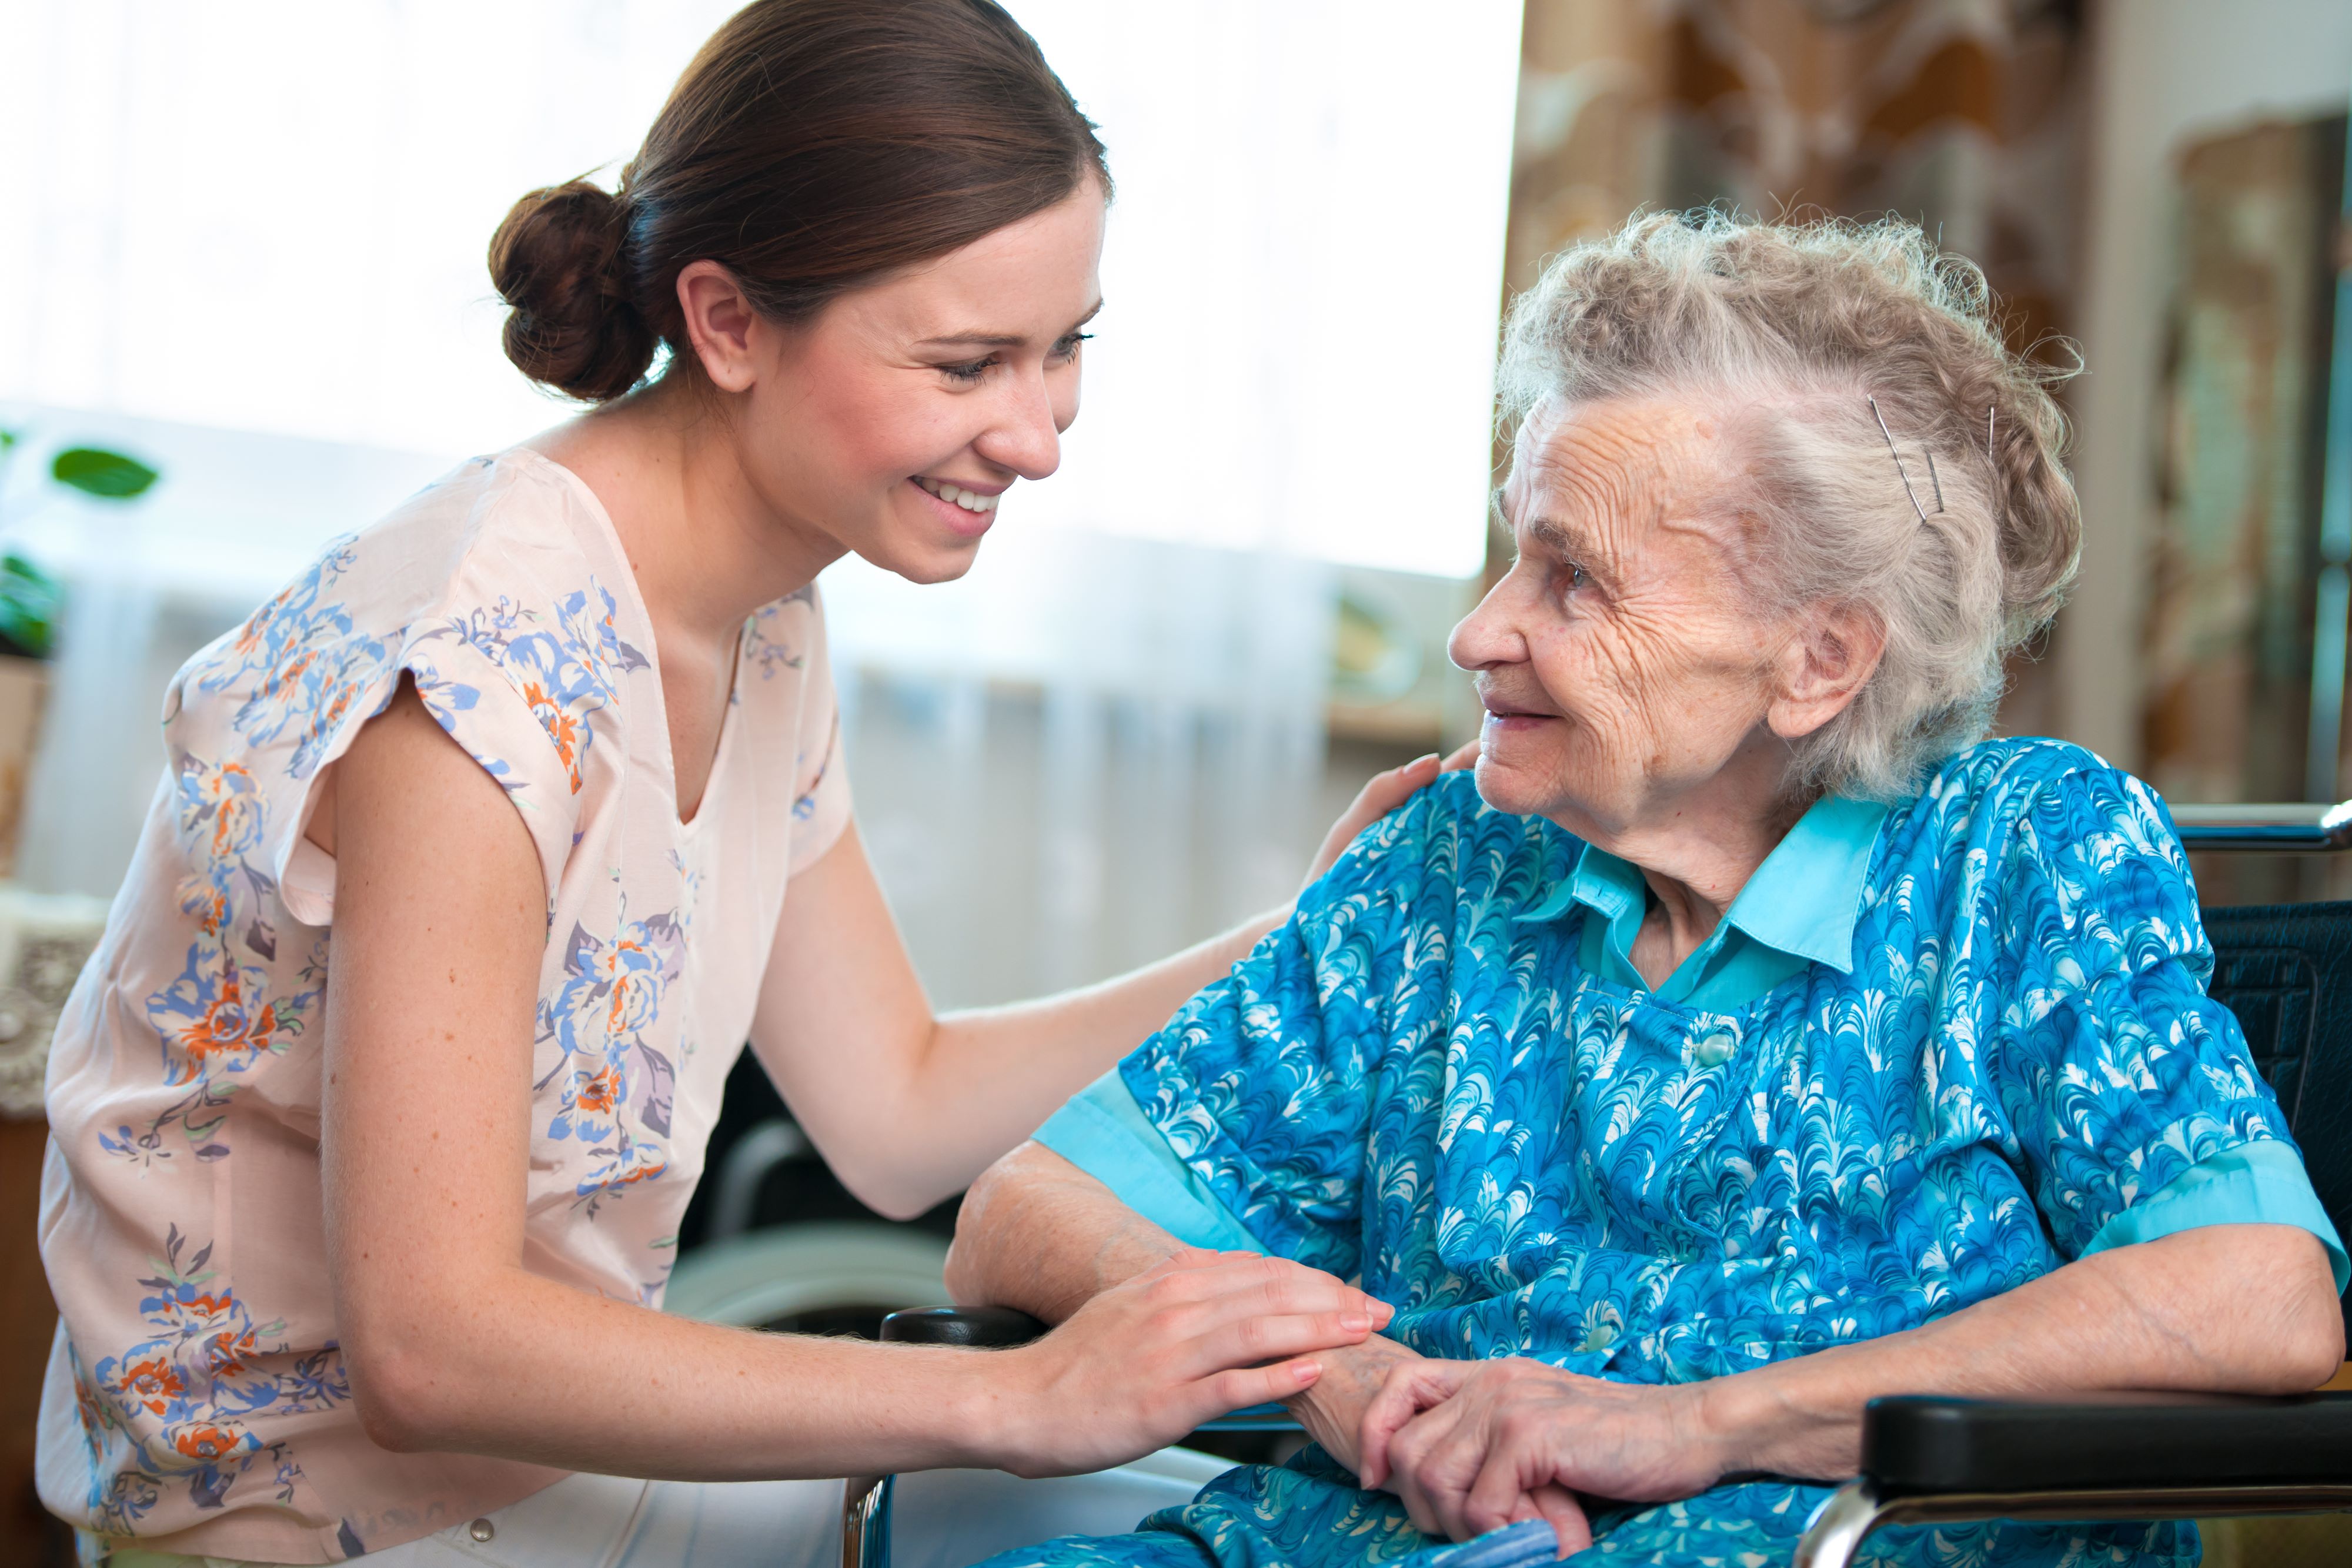 To learn more about our in-home care services in Sonoma County or to discuss your specific needs, please contact Homewatch CareGivers of Santa Rosa. We are here to provide you with the information you need and to help you find the best care solution for you or your loved ones.